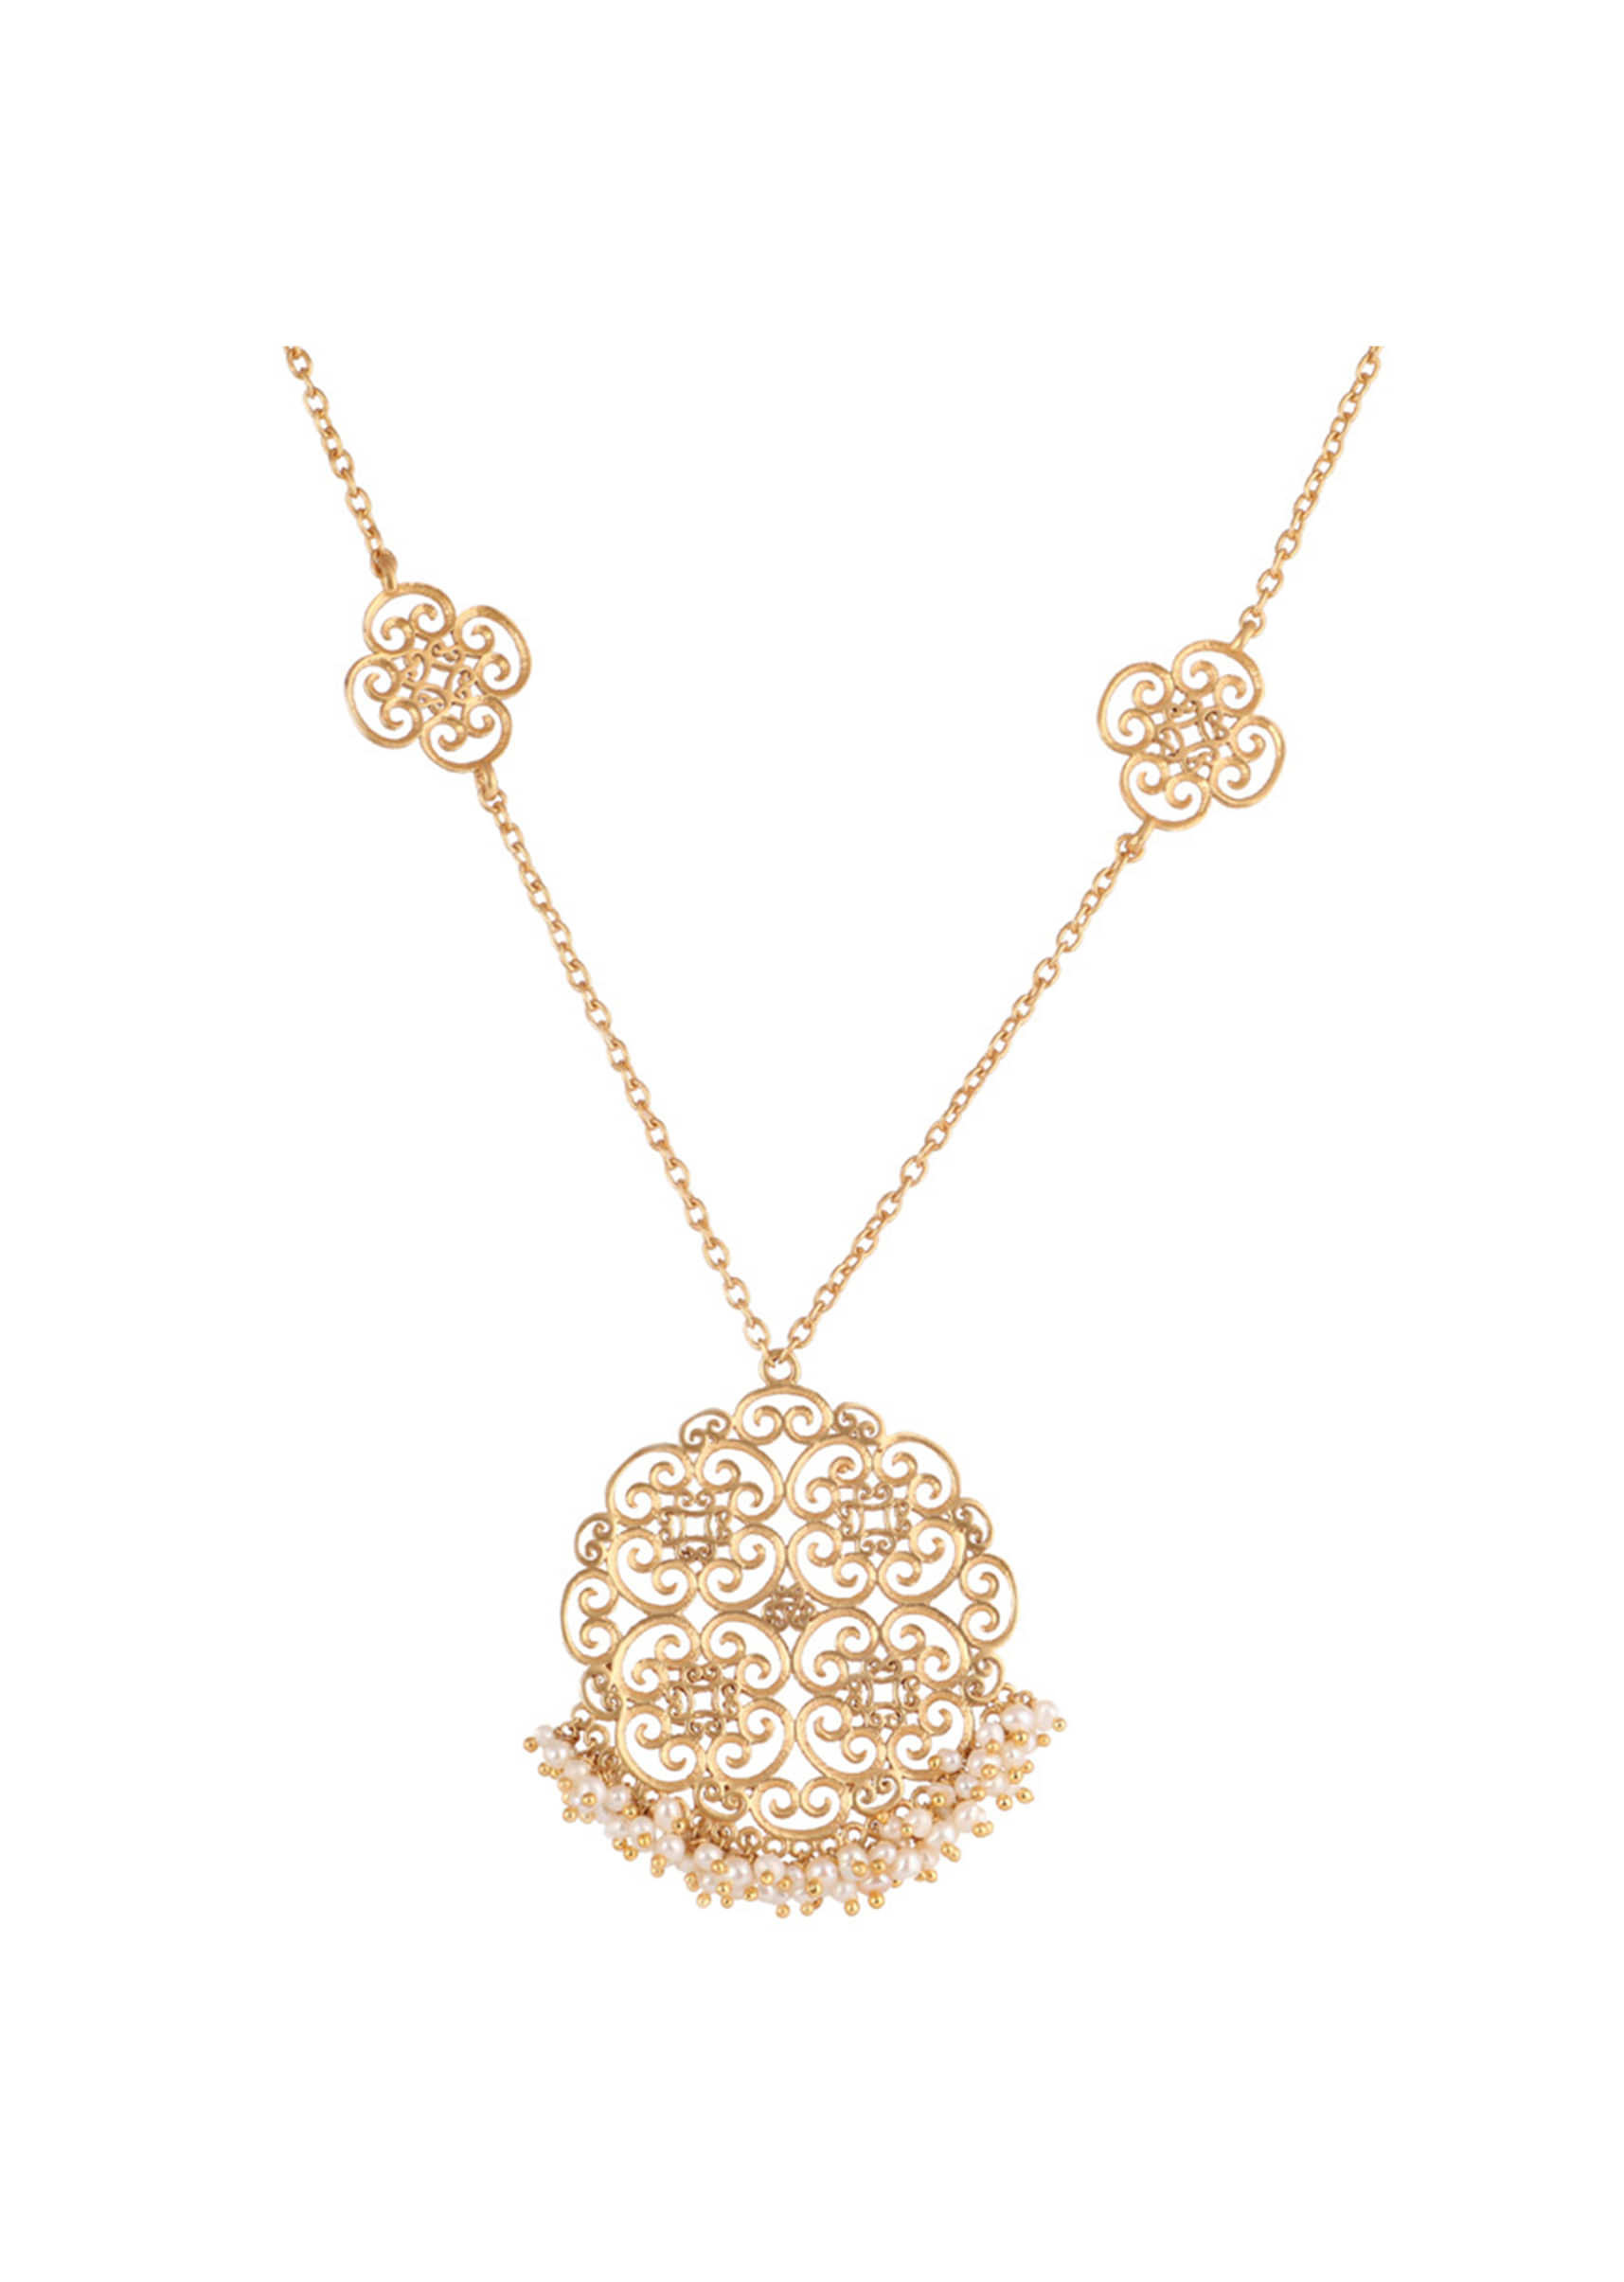 Gold Plated Necklace With Delicate Details Of Filigree Work And Playful Pearl Beads By Zariin